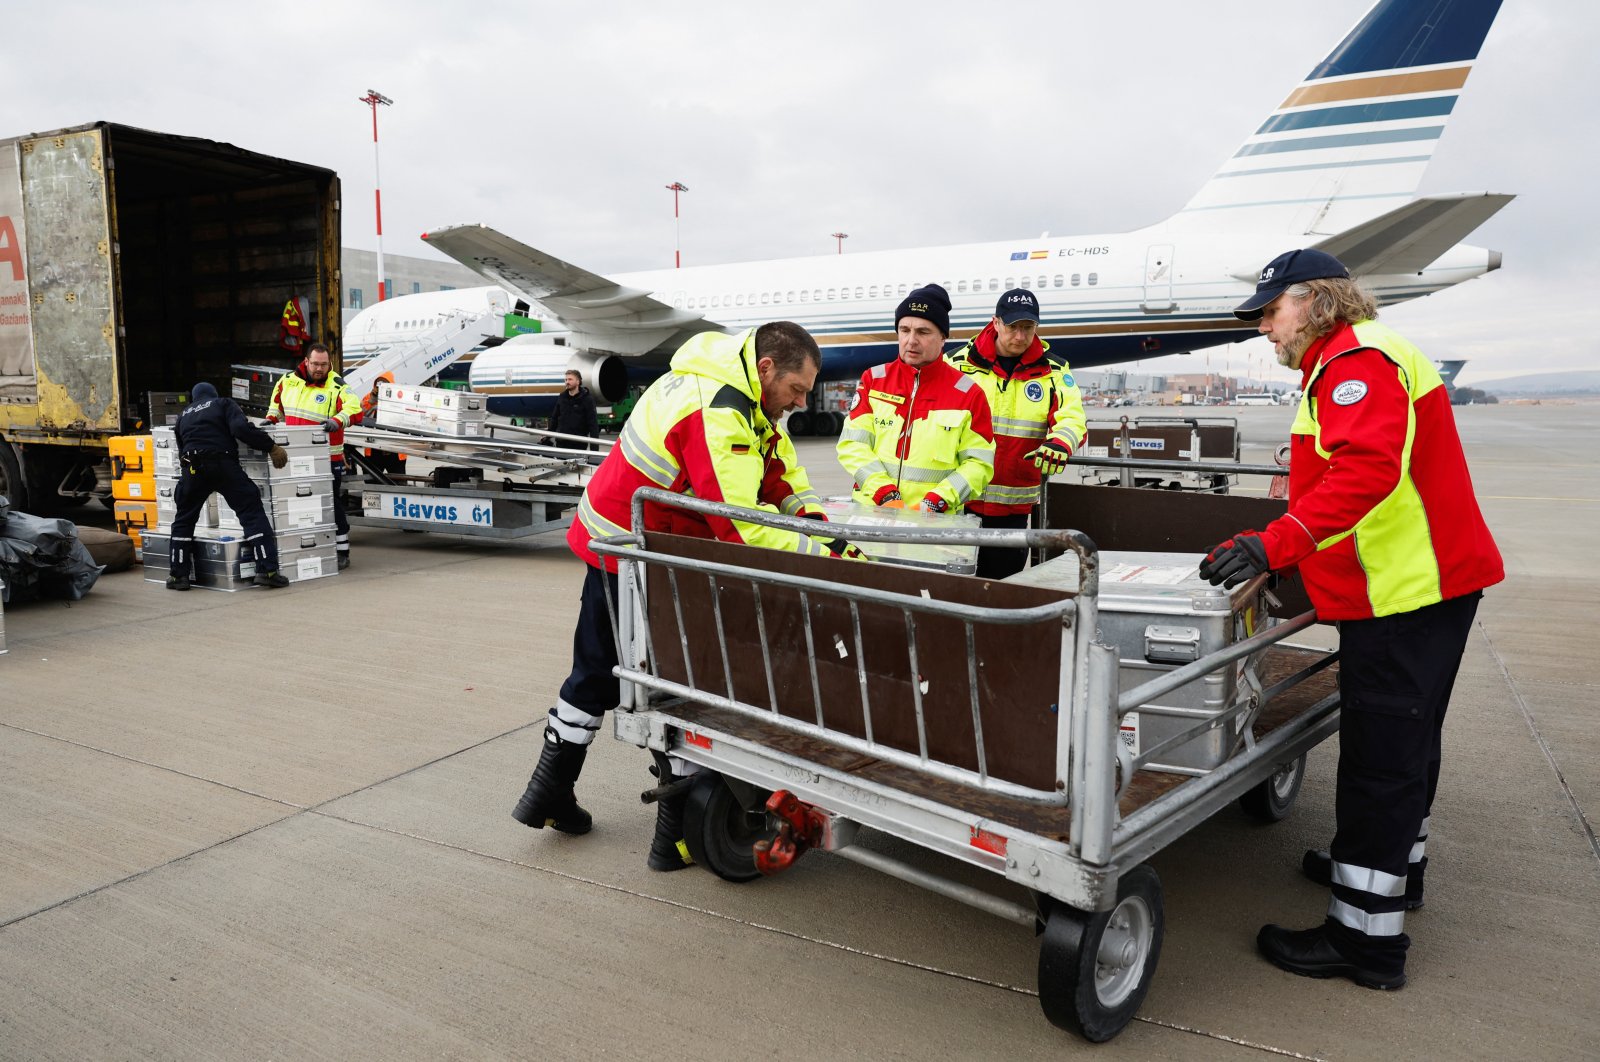 Rescuers of International Search and Rescue (ISAR) Germany unload equipment, as they arrive to help find survivors of the deadly earthquake in Türkiye, at Gaziantep Airport, Türkiye, Feb. 7, 2023. (Reuters Photo)